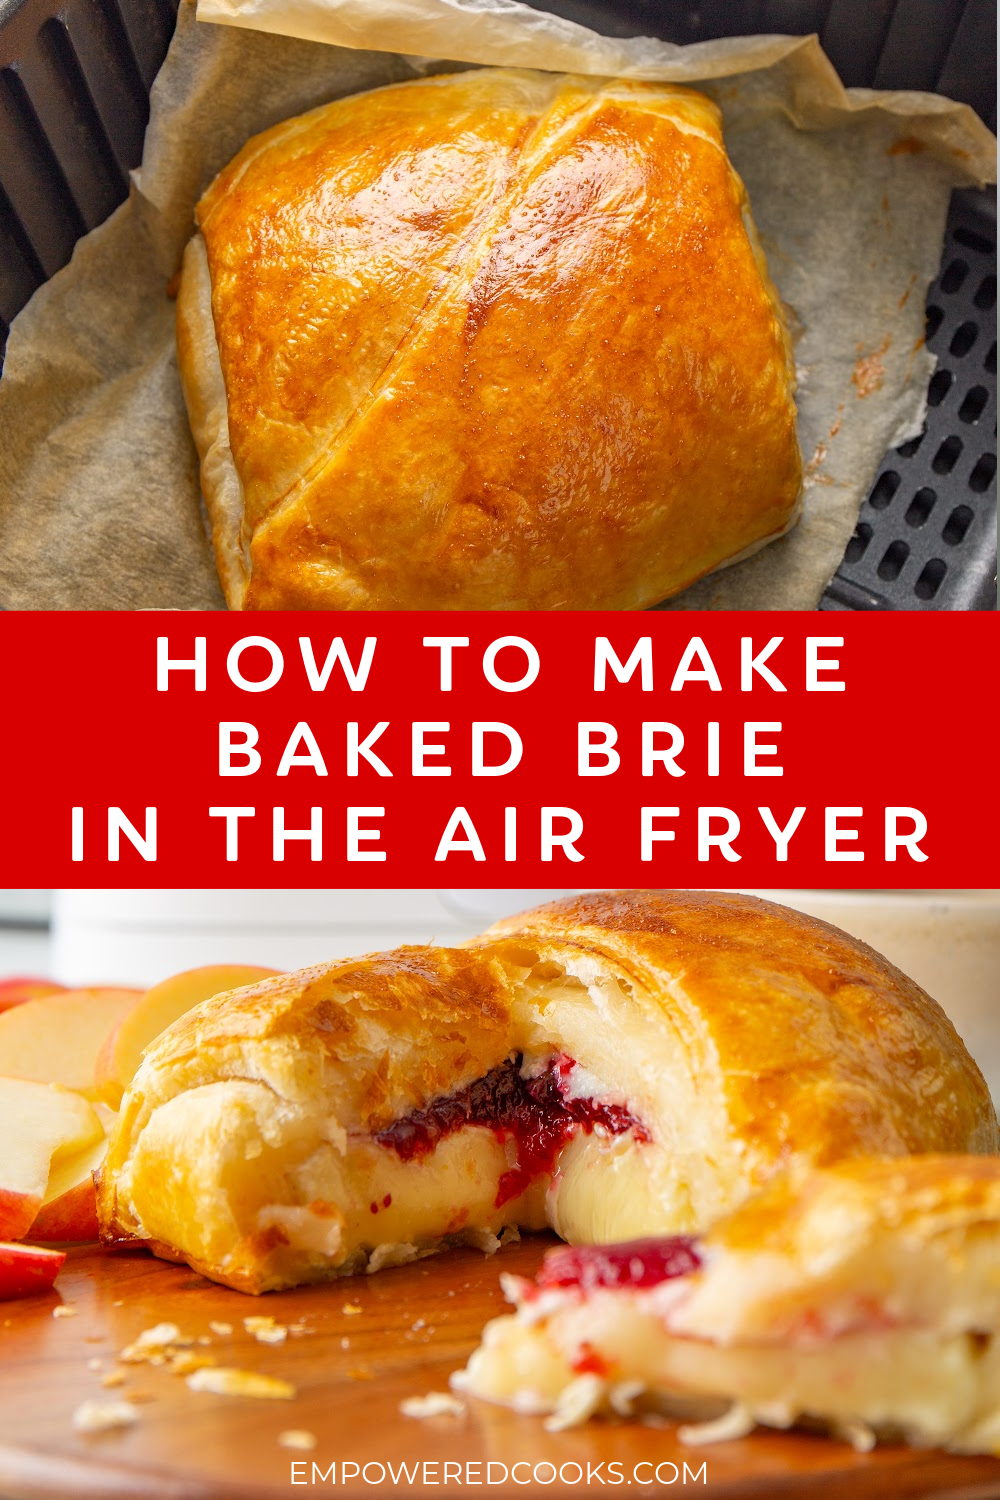 How to make baked brie in the air fryer